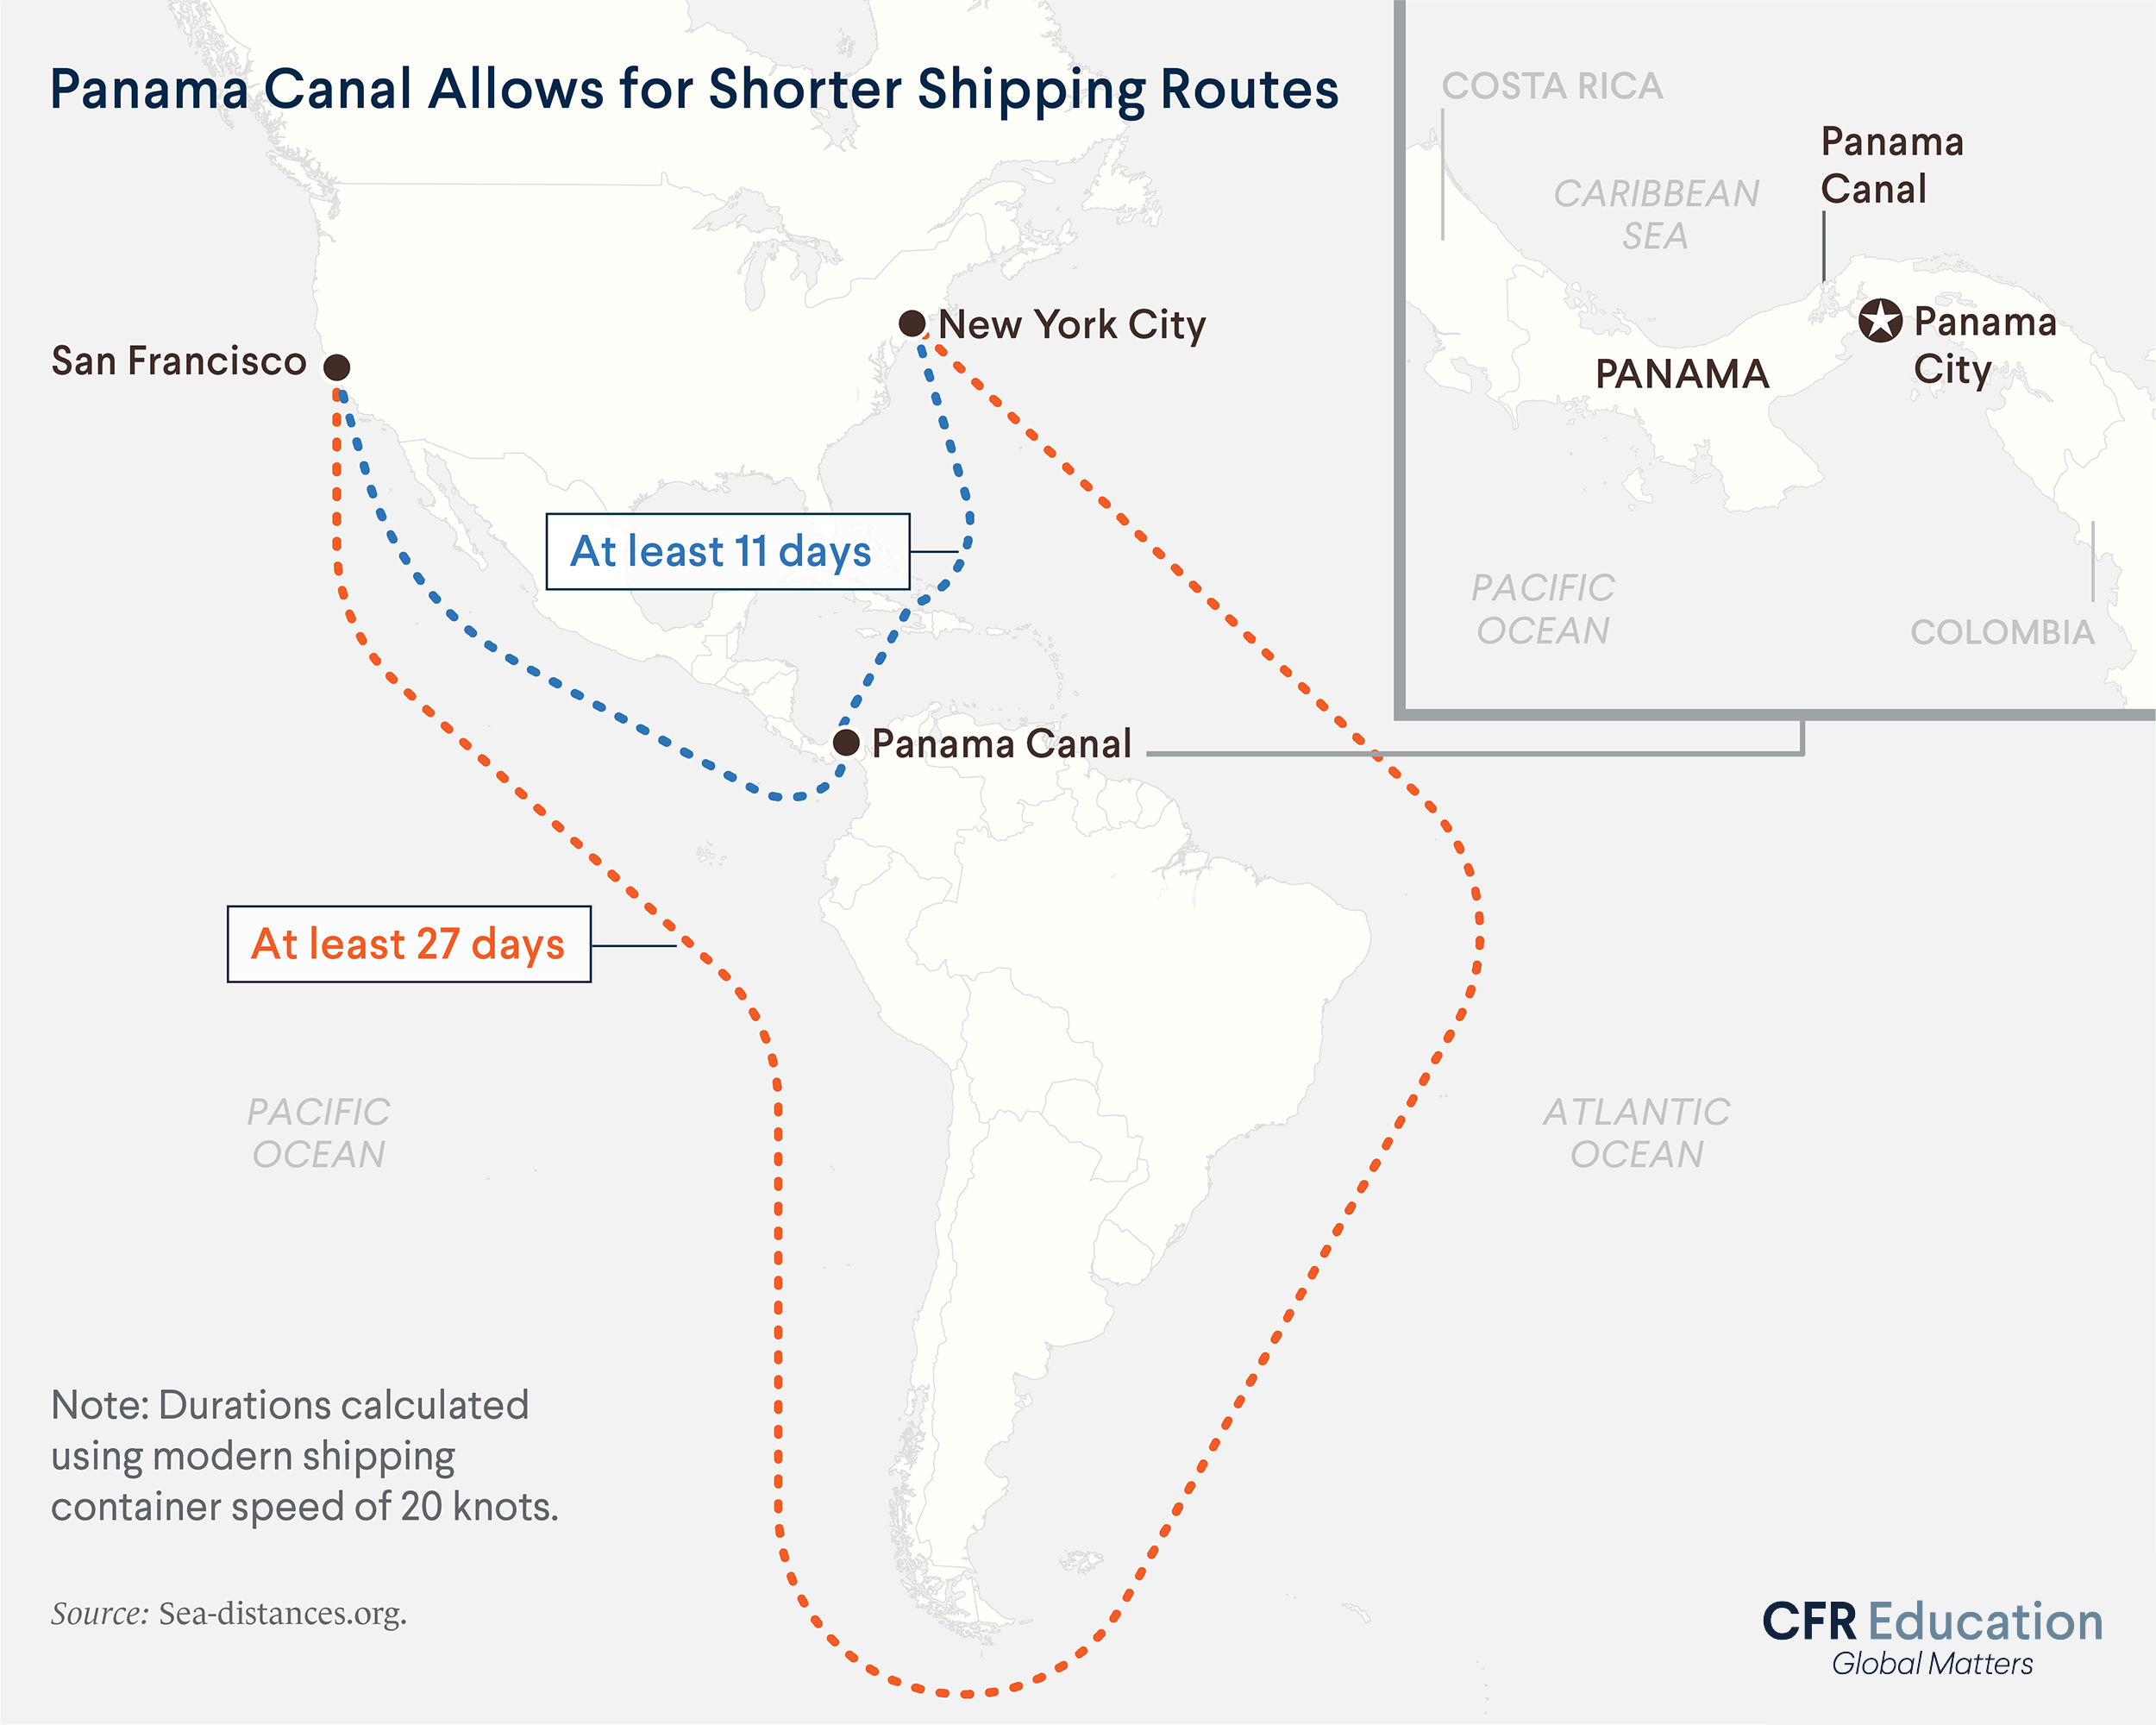  Map shows how Panama Canal allowed for shorter shipping routes. Before the Canal, a ship would take at least 27 days to get from New York to San Francisco. With the canal, the same trip took at least 11 days. For more info contact us at cfr_education@cfr